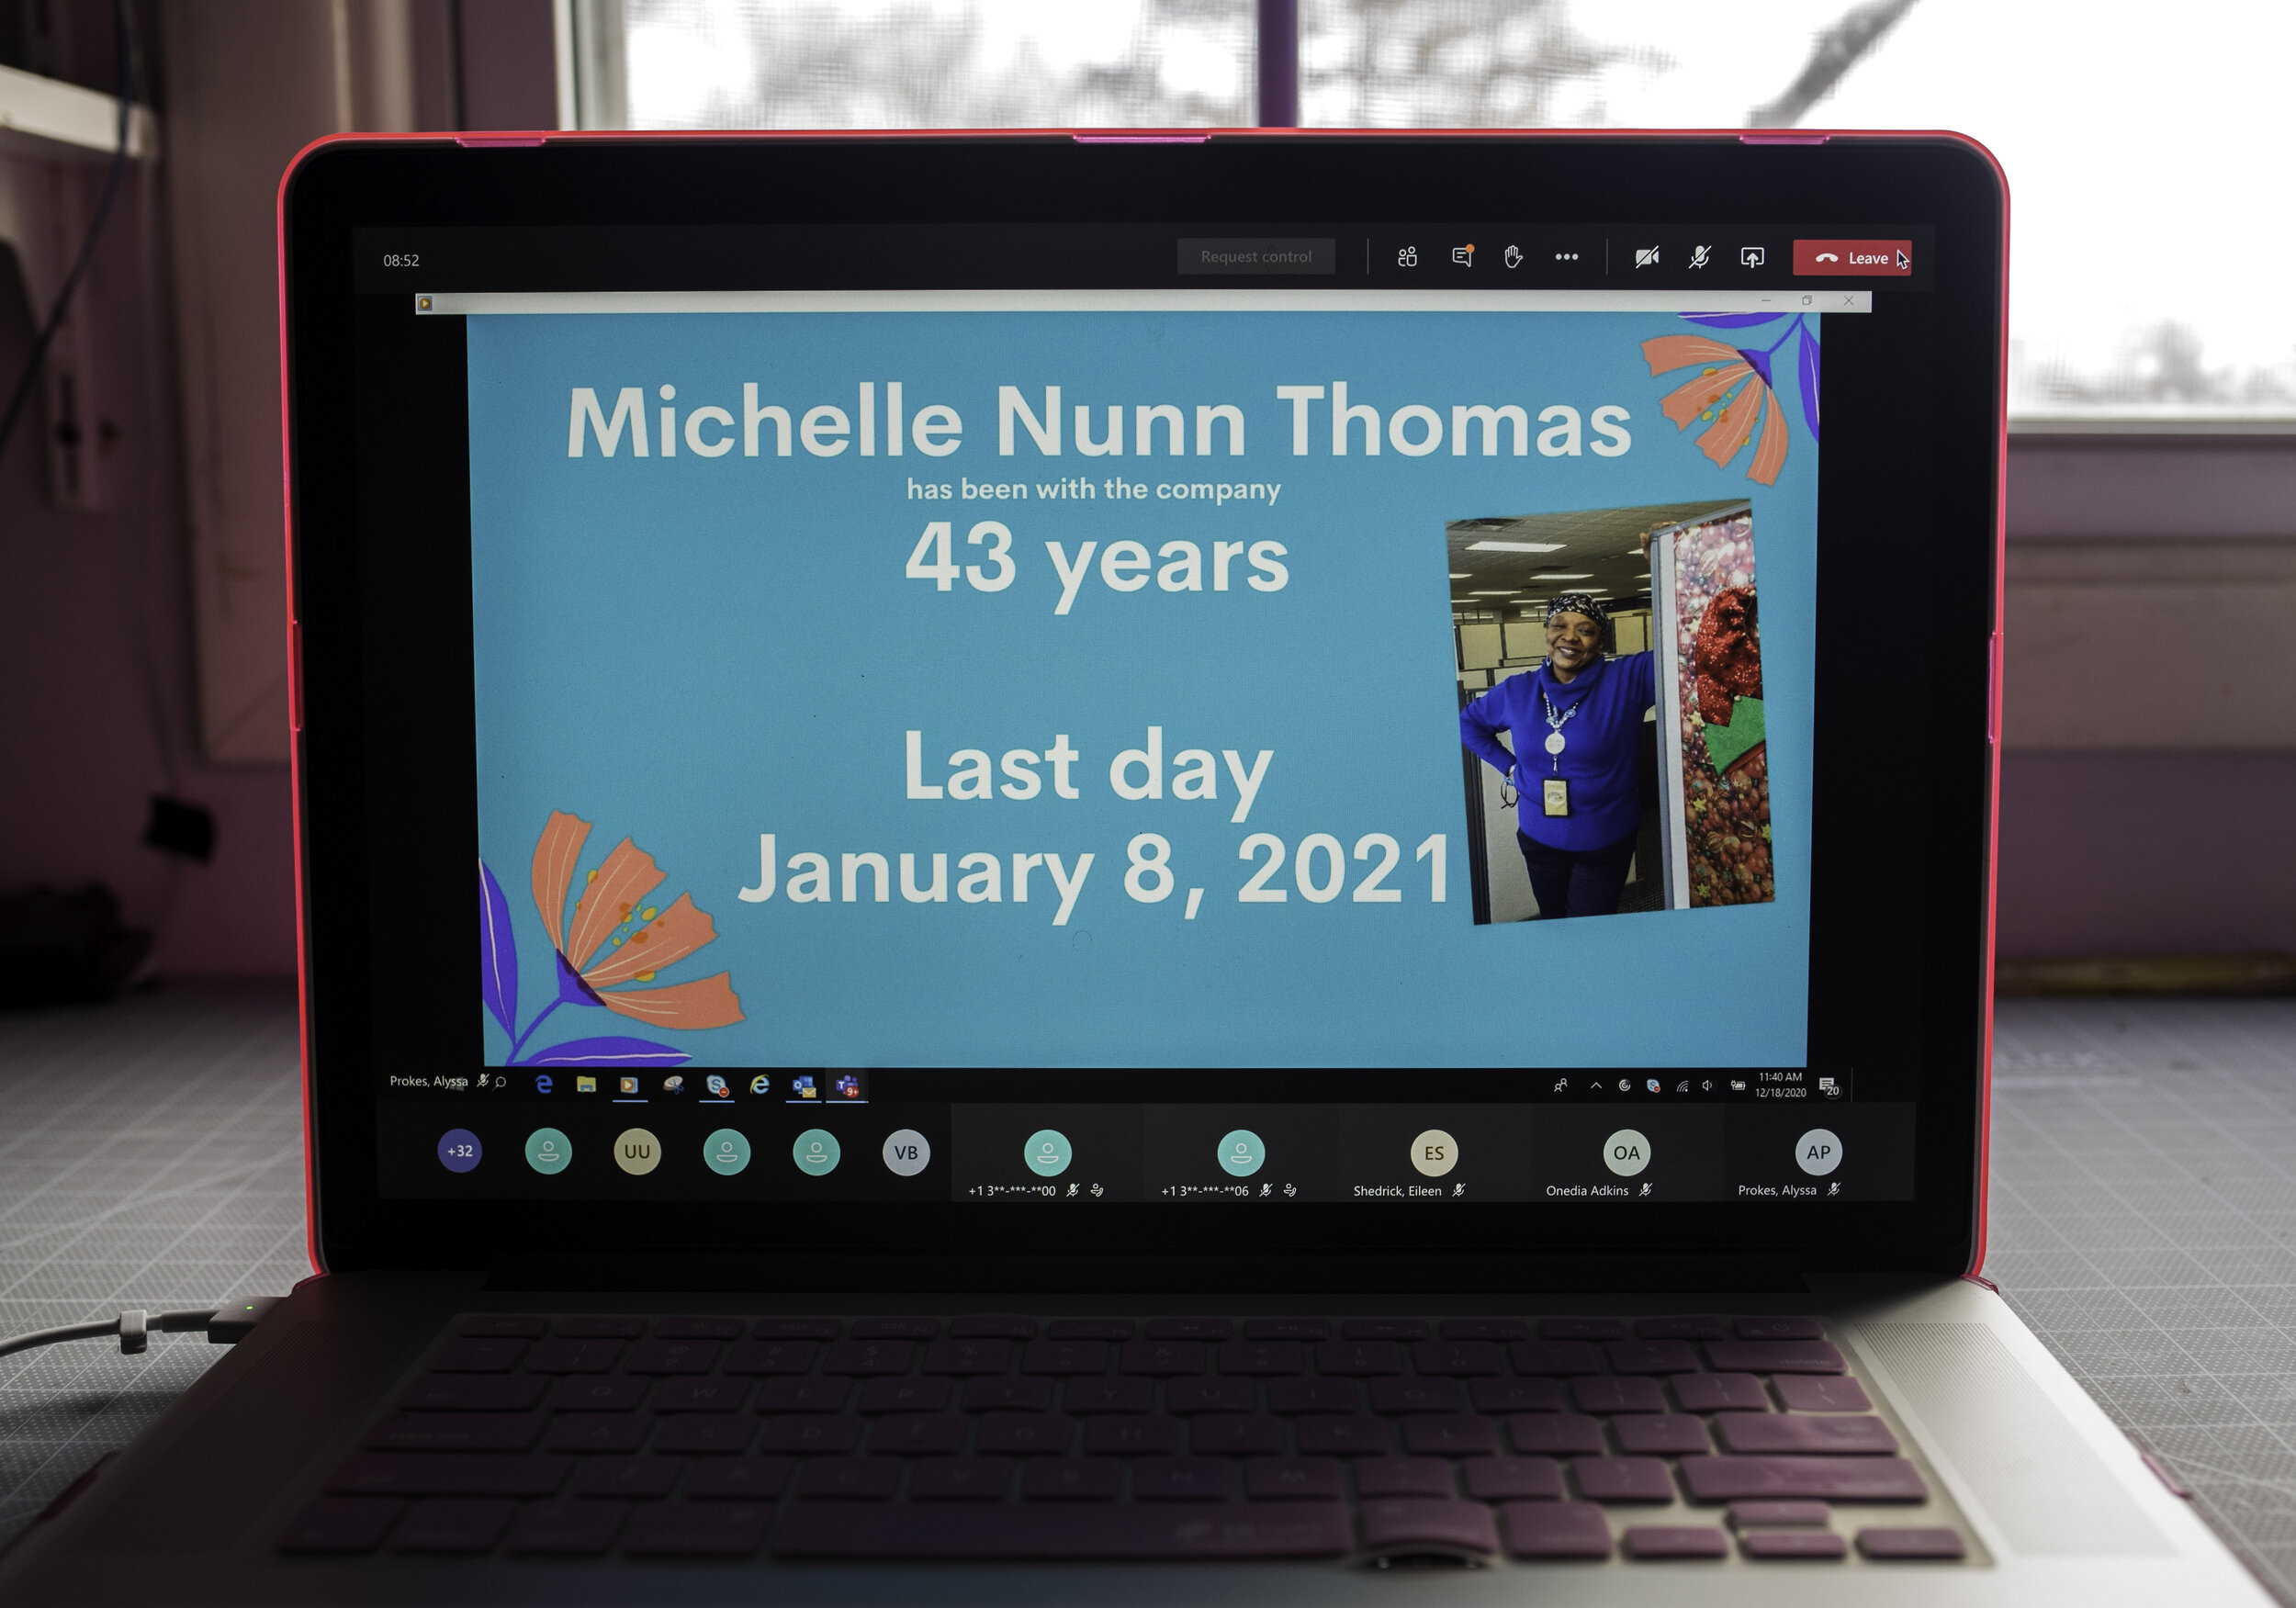   My mother, Michelle Nunn-Thomas, retired from working at Blue Cross and Blue Shield of Michigan after 43 years of service. She was a Customer Service Representative and eventually a Supervisor during her lengthy tenure. Due to COVID, the retirement